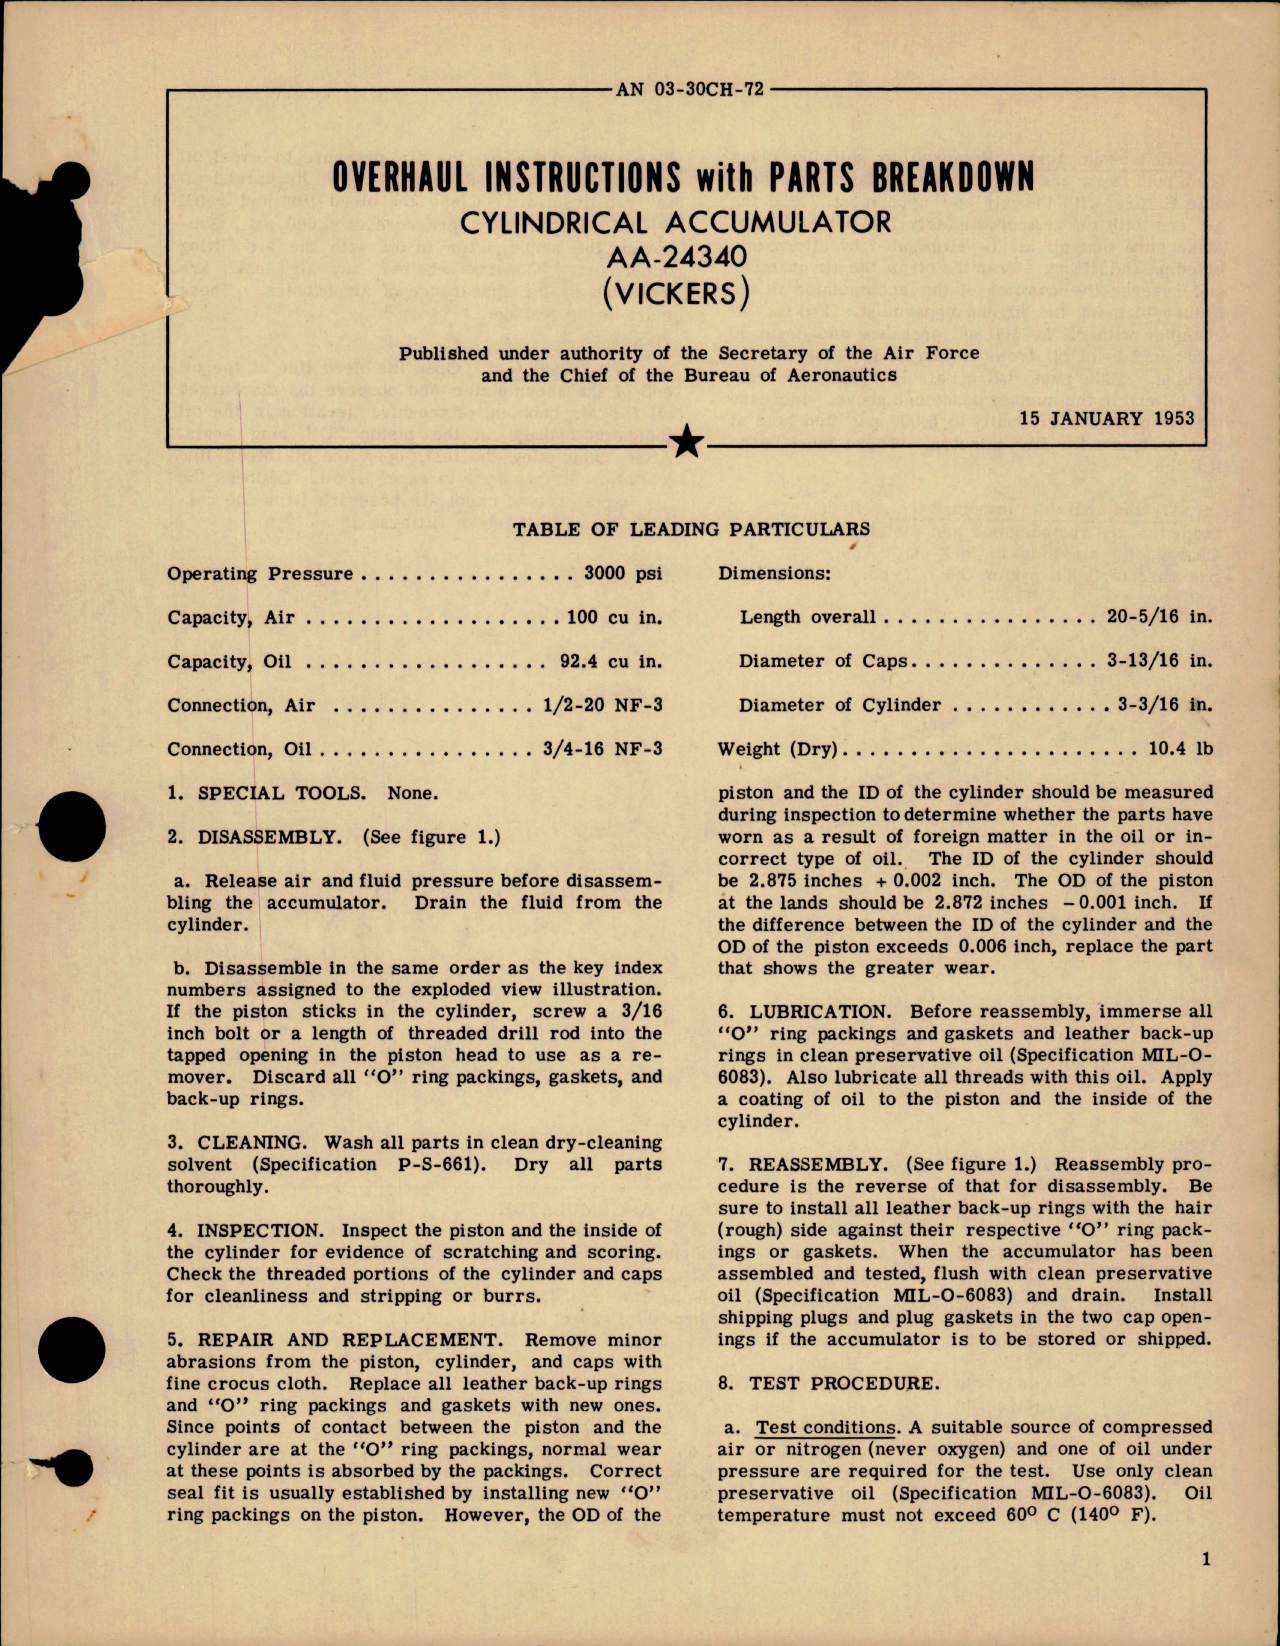 Sample page 1 from AirCorps Library document: Overhaul Instructions with Parts Breakdown for Cylindrical Accumulator - AA-24340